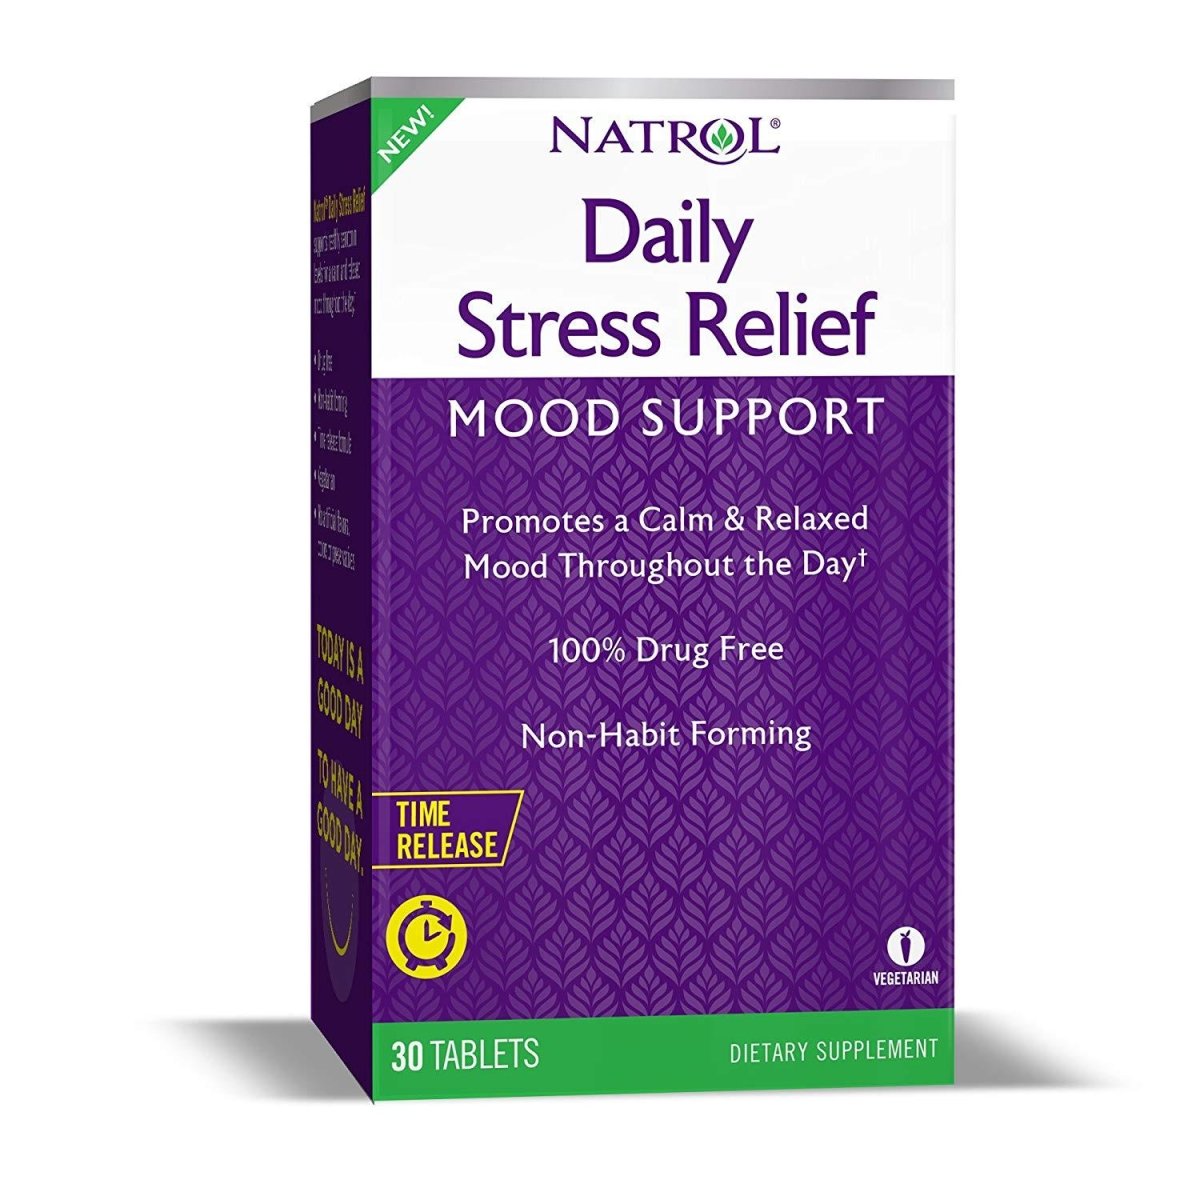 Natrol Daily Stress Relief Time Released 100mg Tablets, 30Count